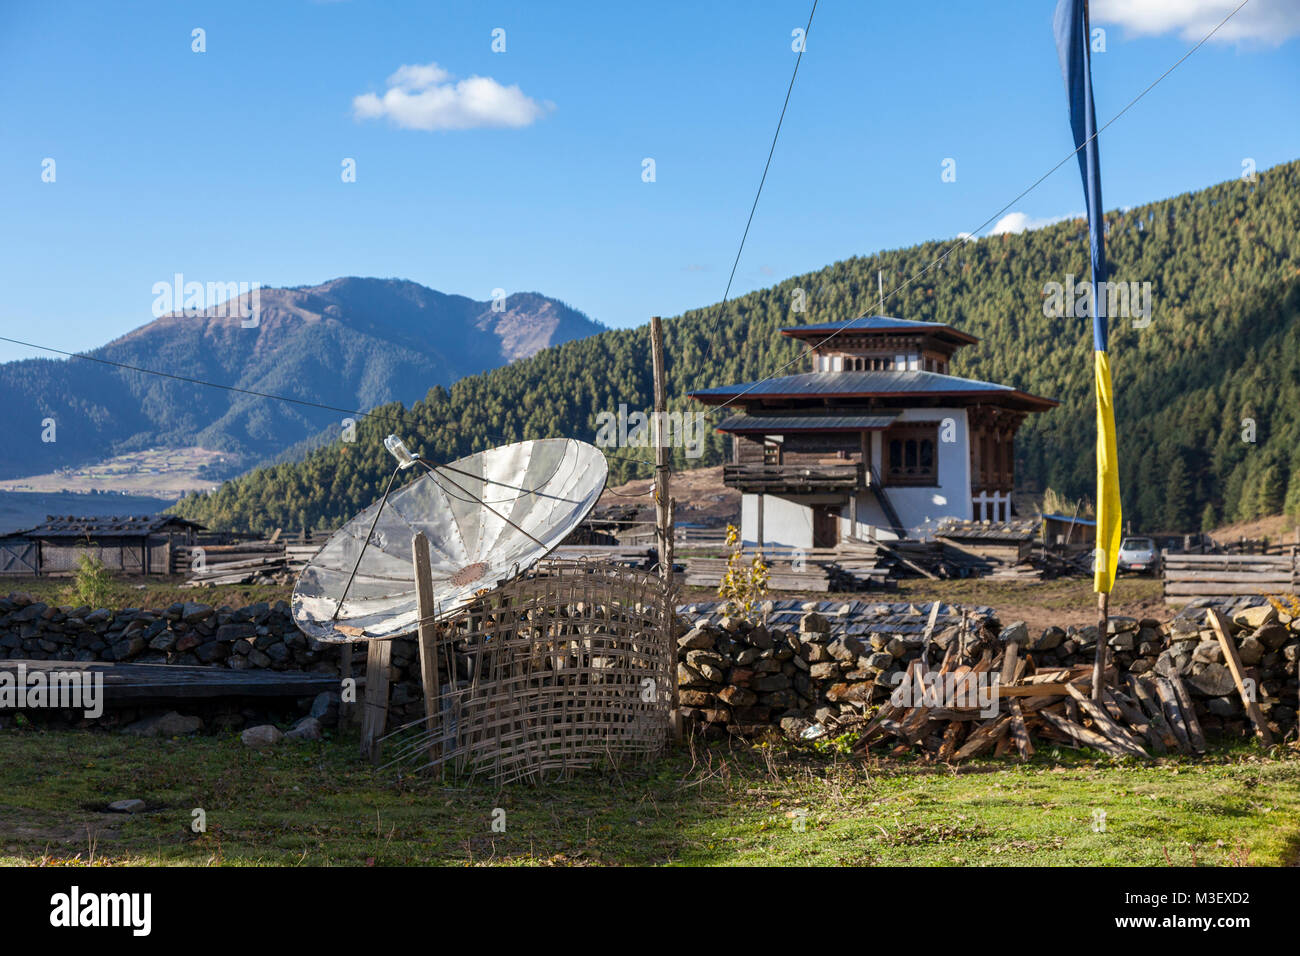 Phobjikha, Bhutan.  Satellite Dish in Foreground, Typical Middle-class Rural Farmhouse in Background,  Kikorthang Village. Stock Photo